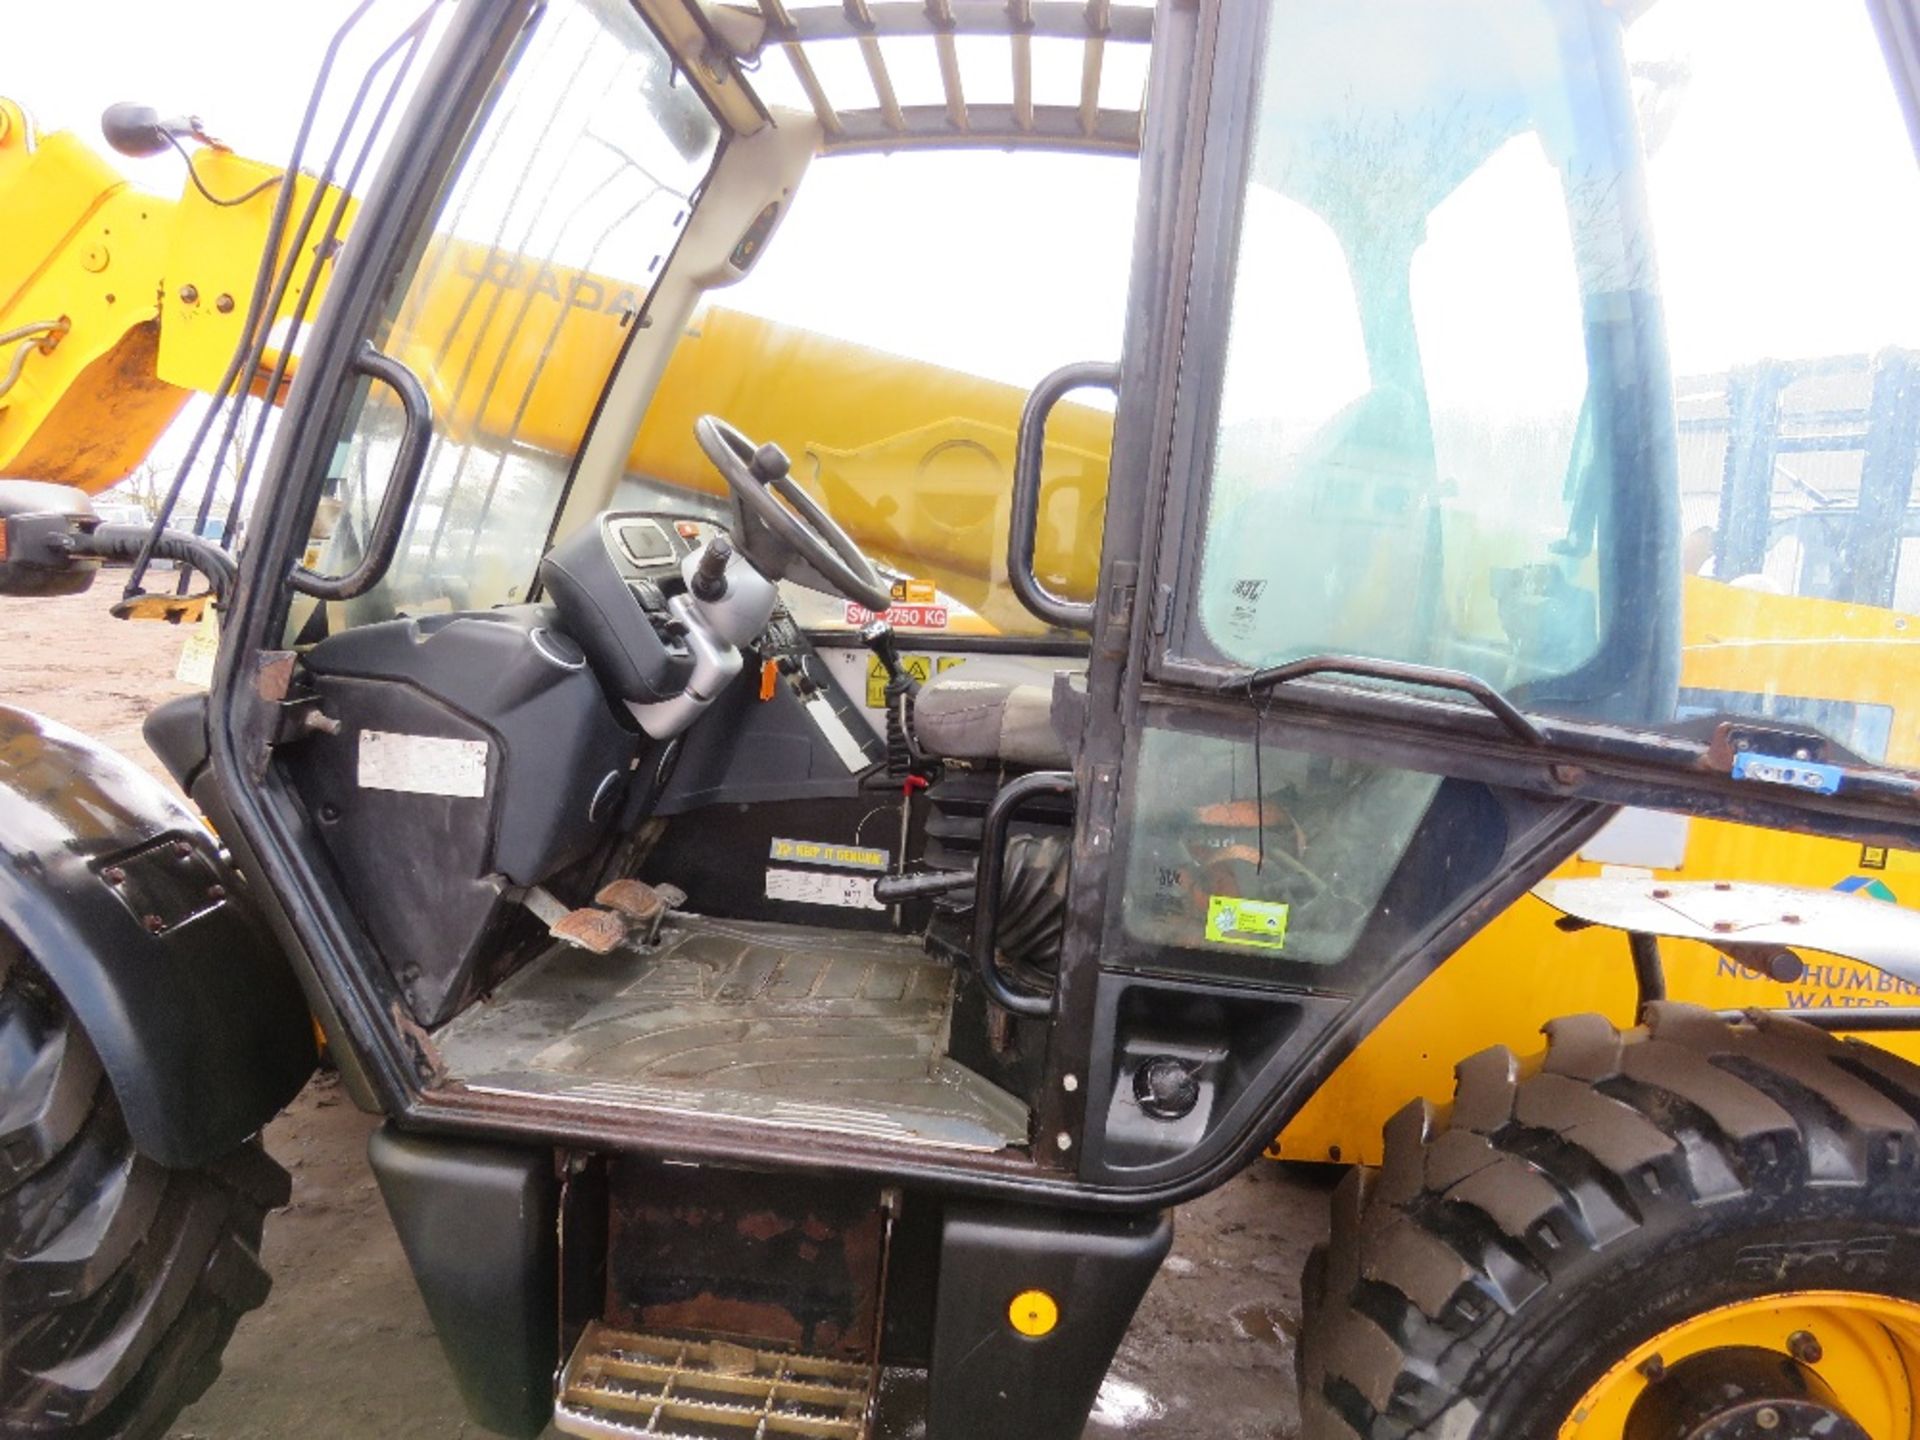 JCB 531-70 TELEHANDLER YEAR 20O7 BUILD, TURBO ENGINE. REG:NK07 HTA WITH V5. ONE PREVIOUS REC KEEPER - Image 12 of 17